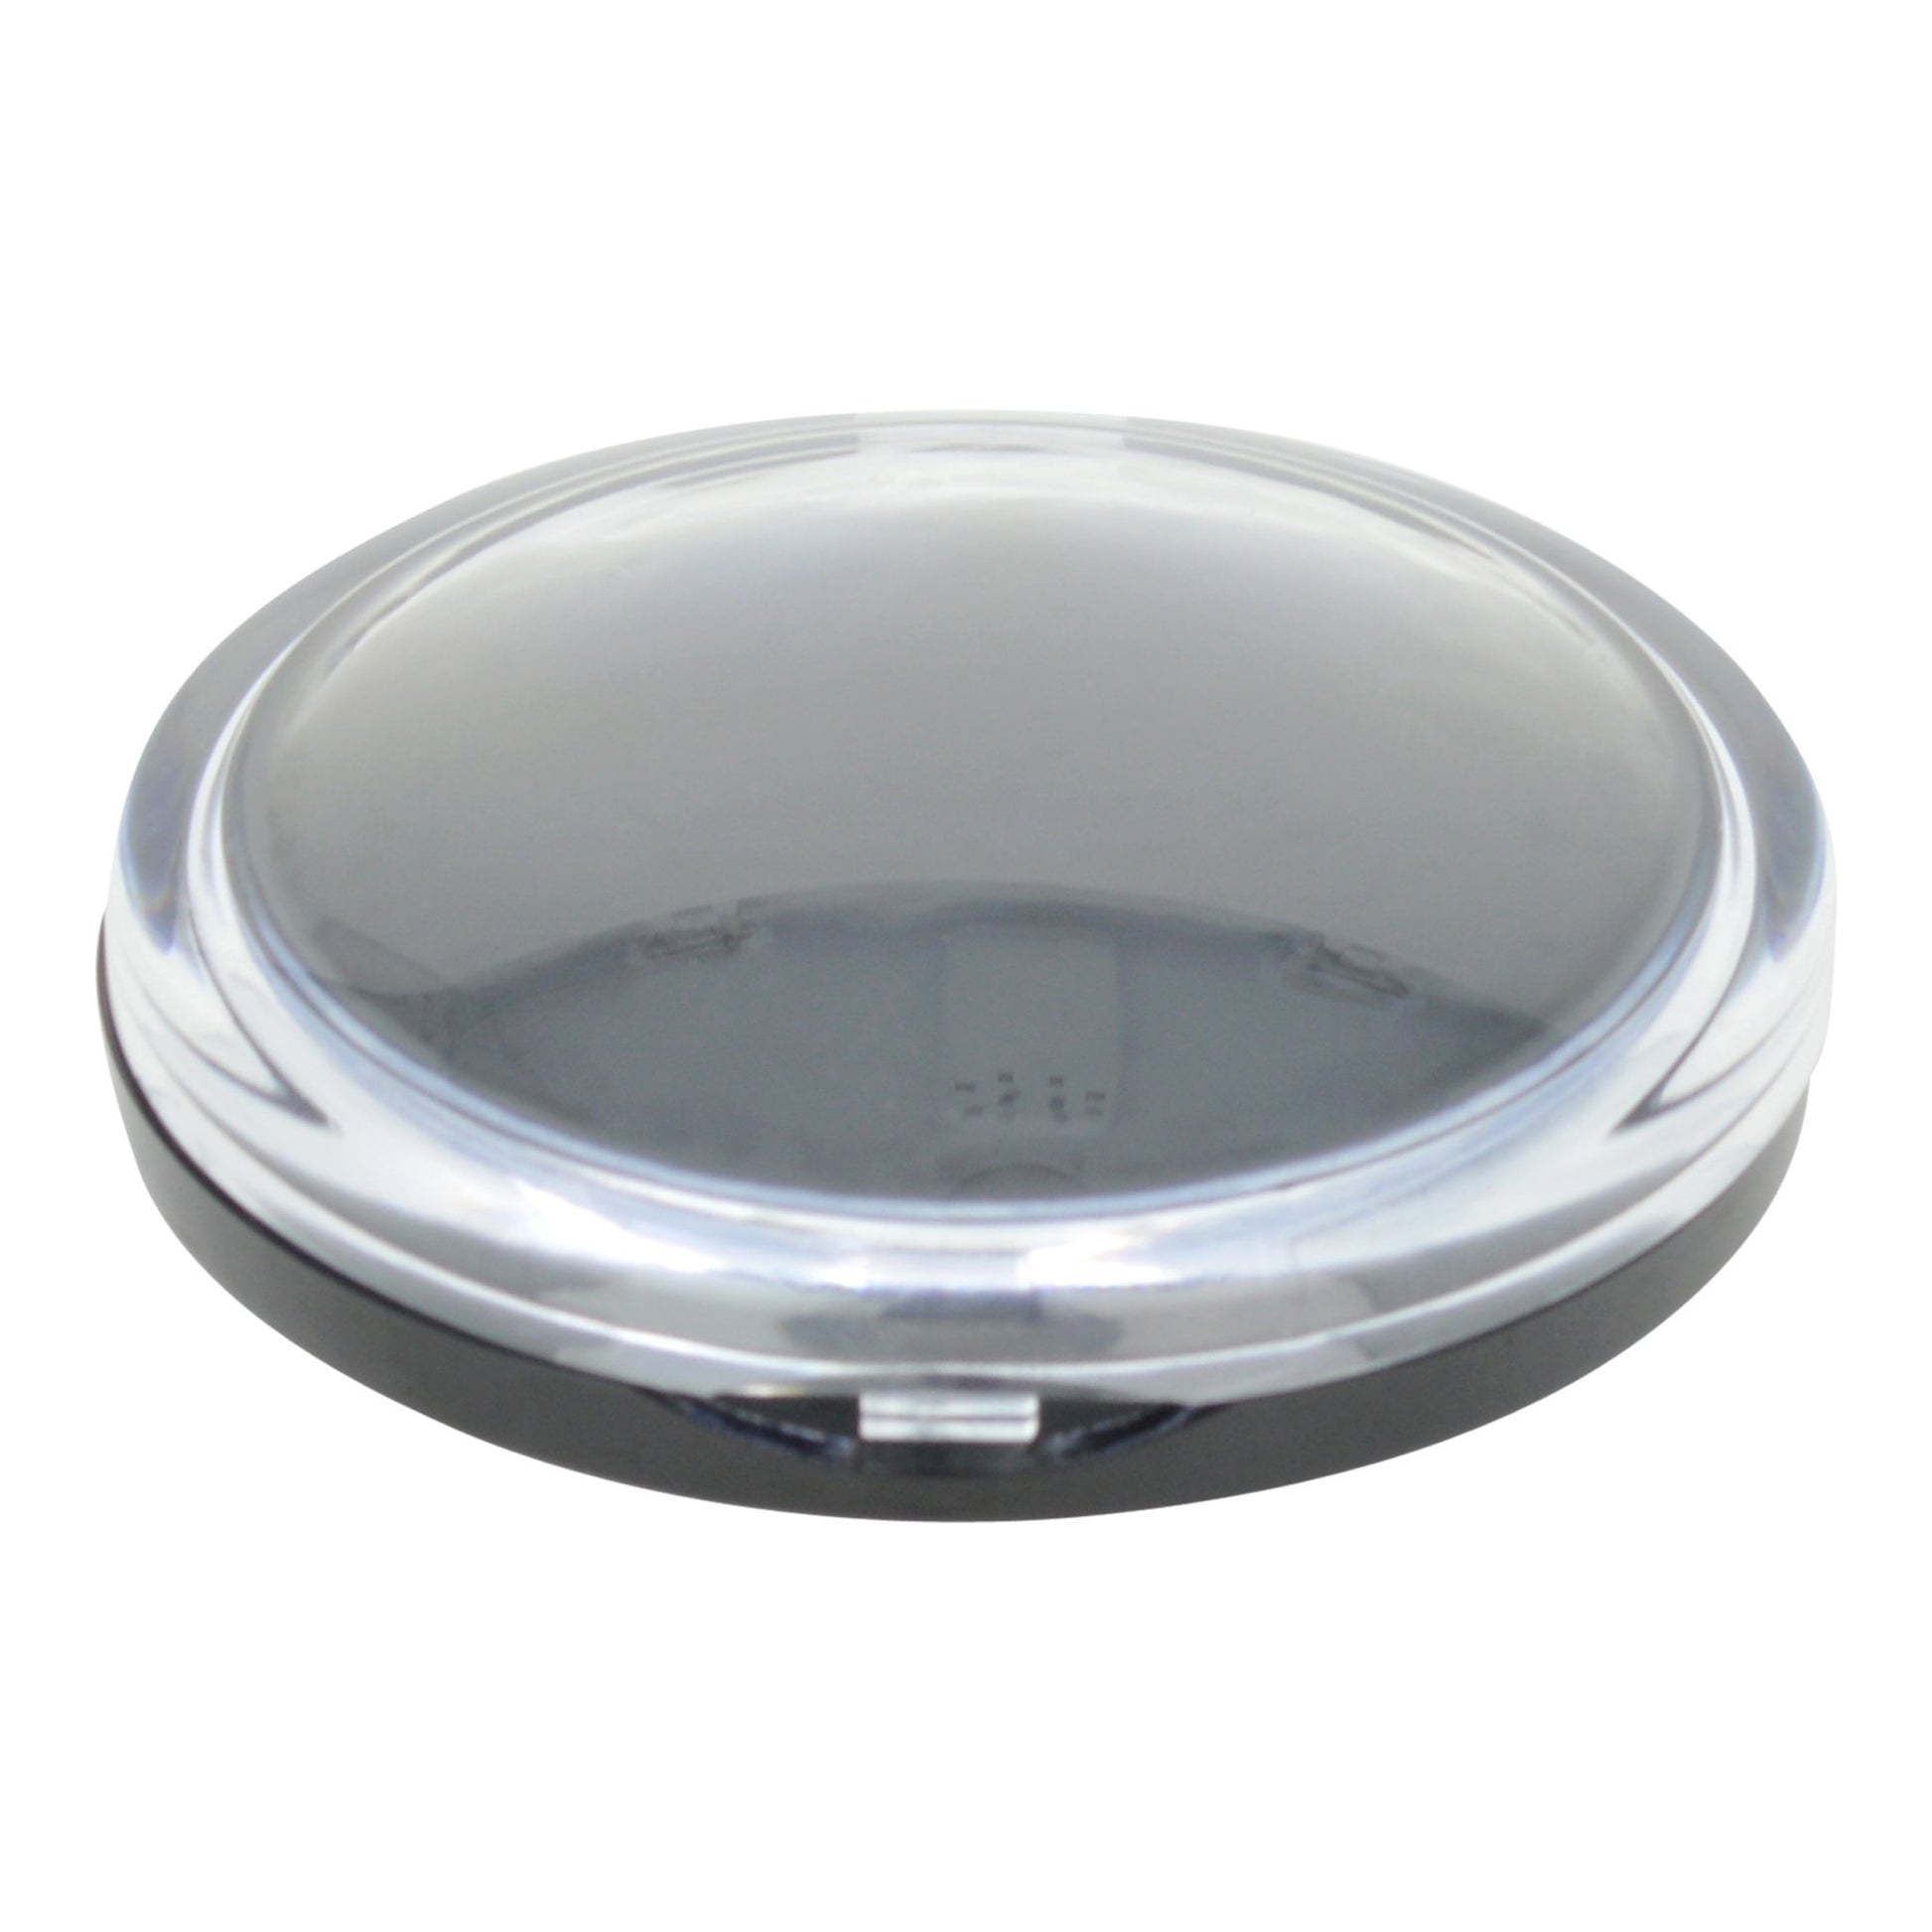 Round silicone stash container smoking accessory with clam seashell makeup compact design prismatic color